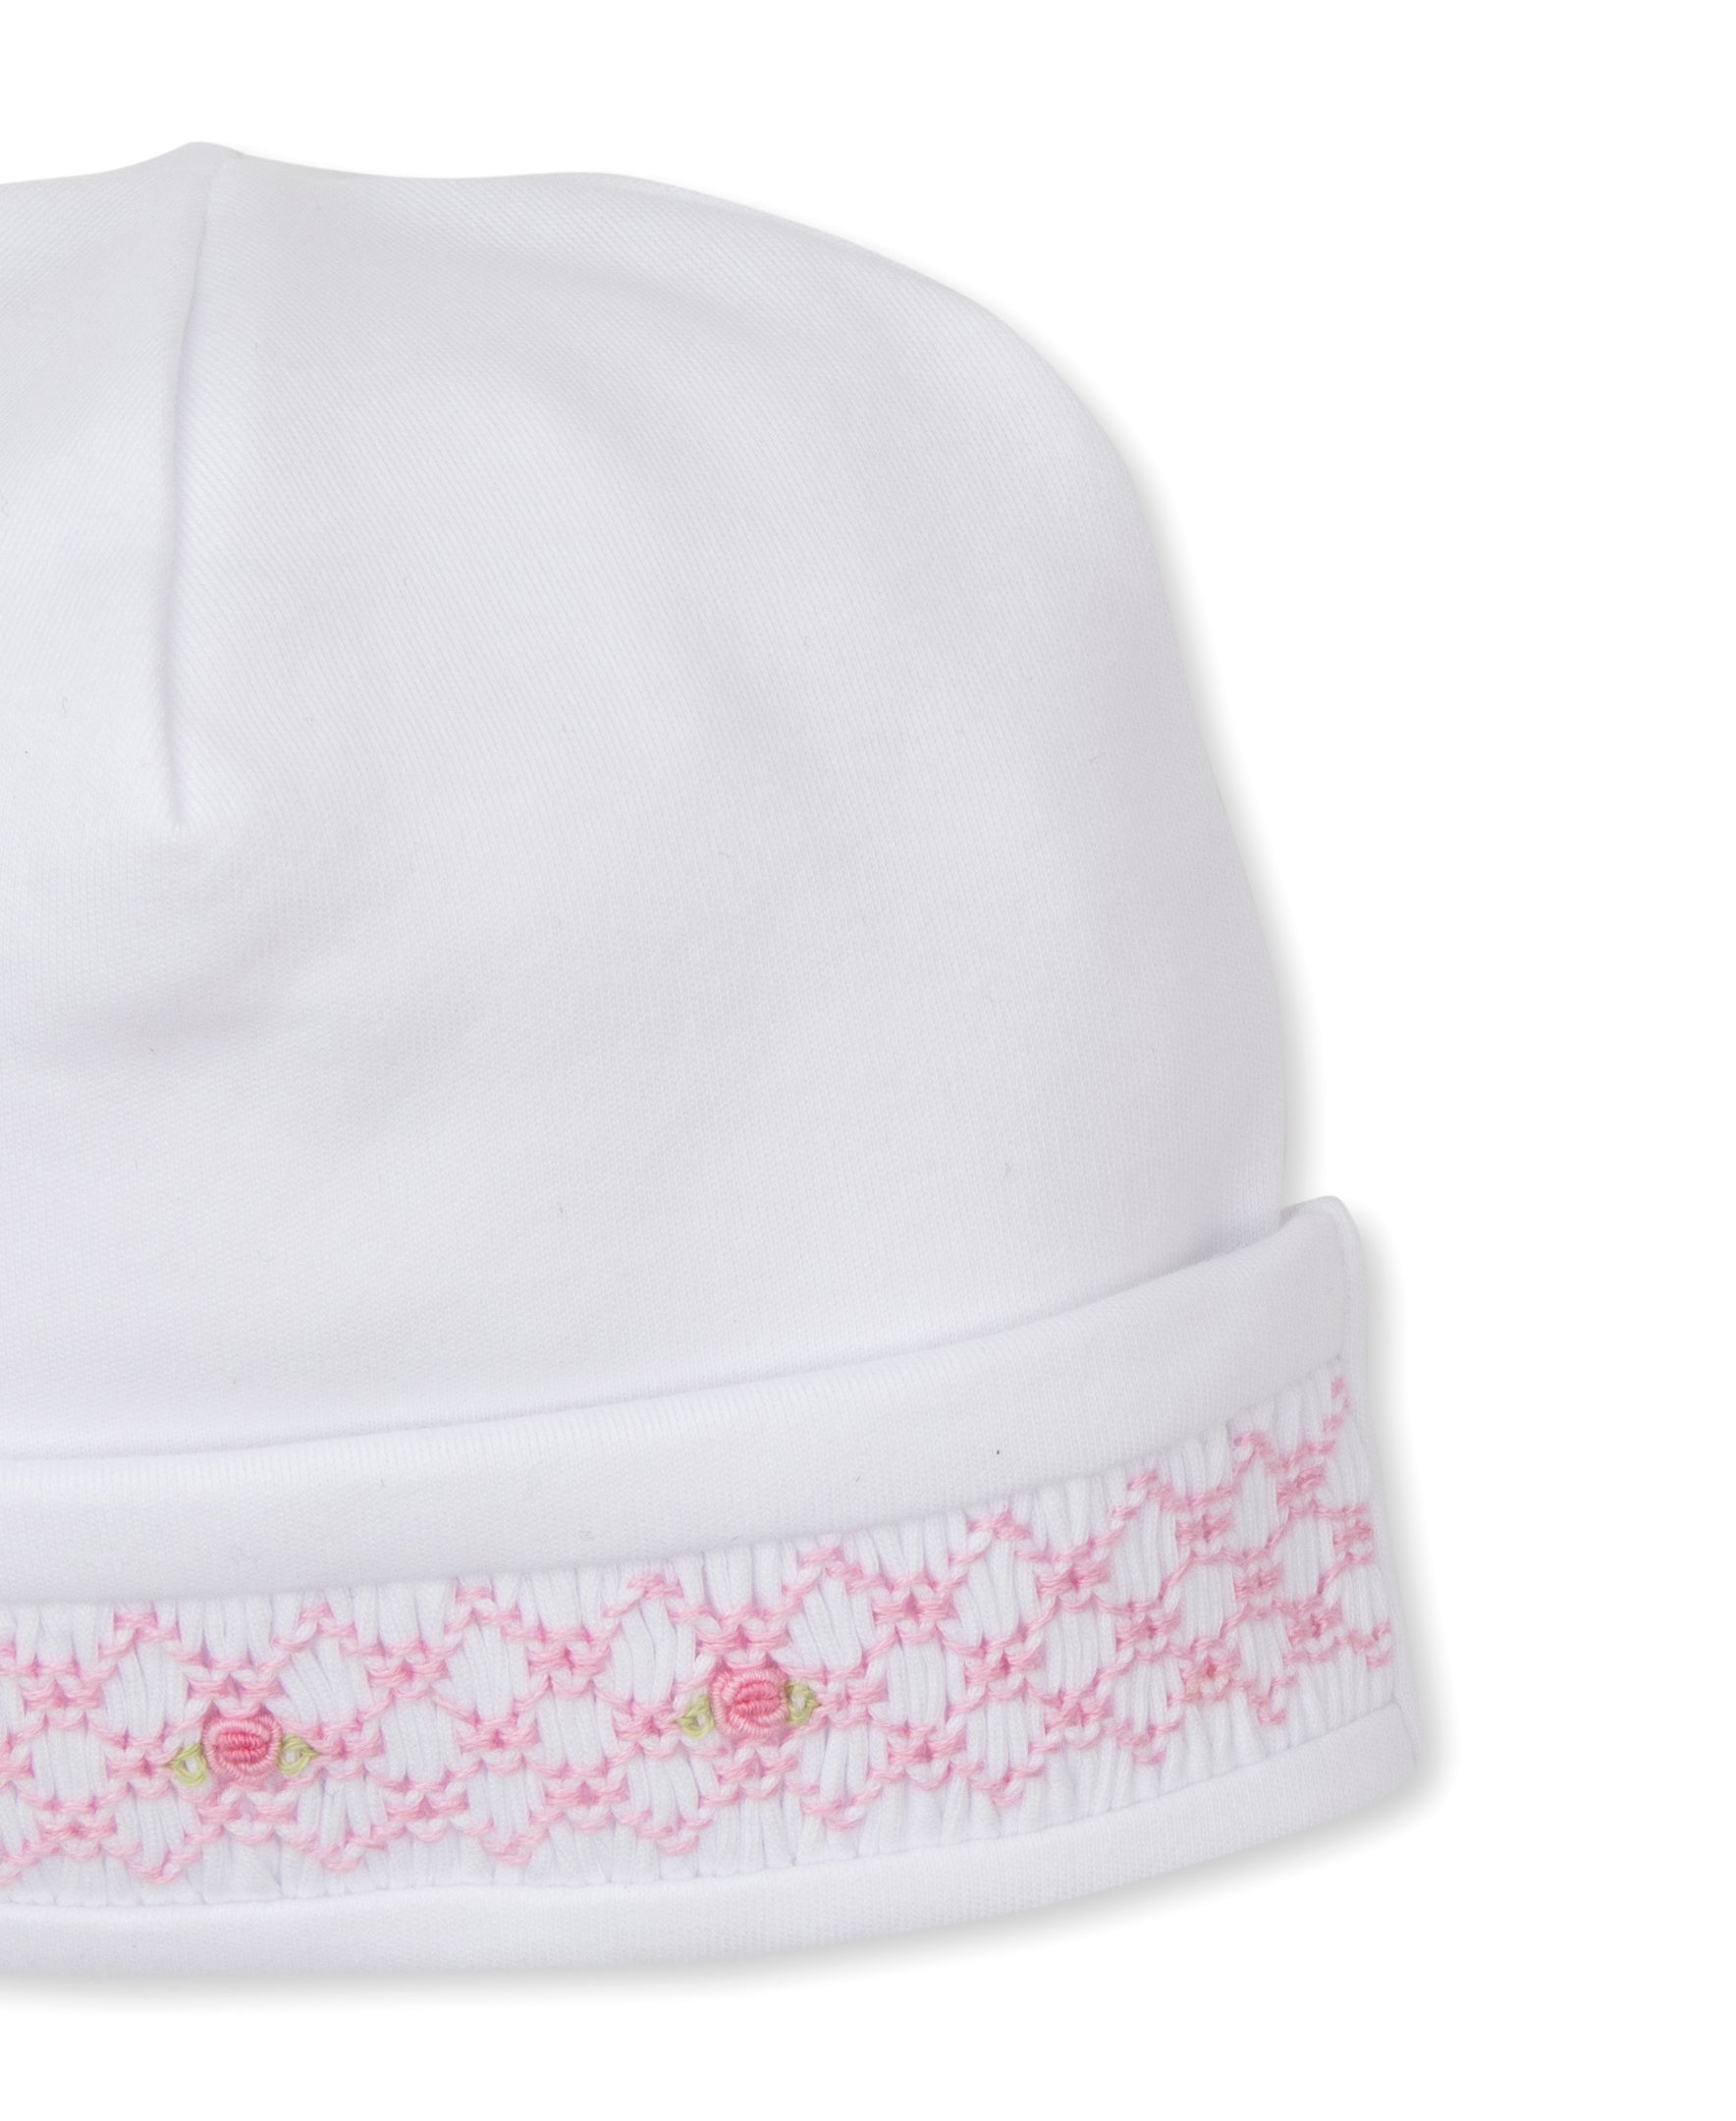 CLB Fall 23 White/Pink Hand Smocked Hat - Kissy Kissy